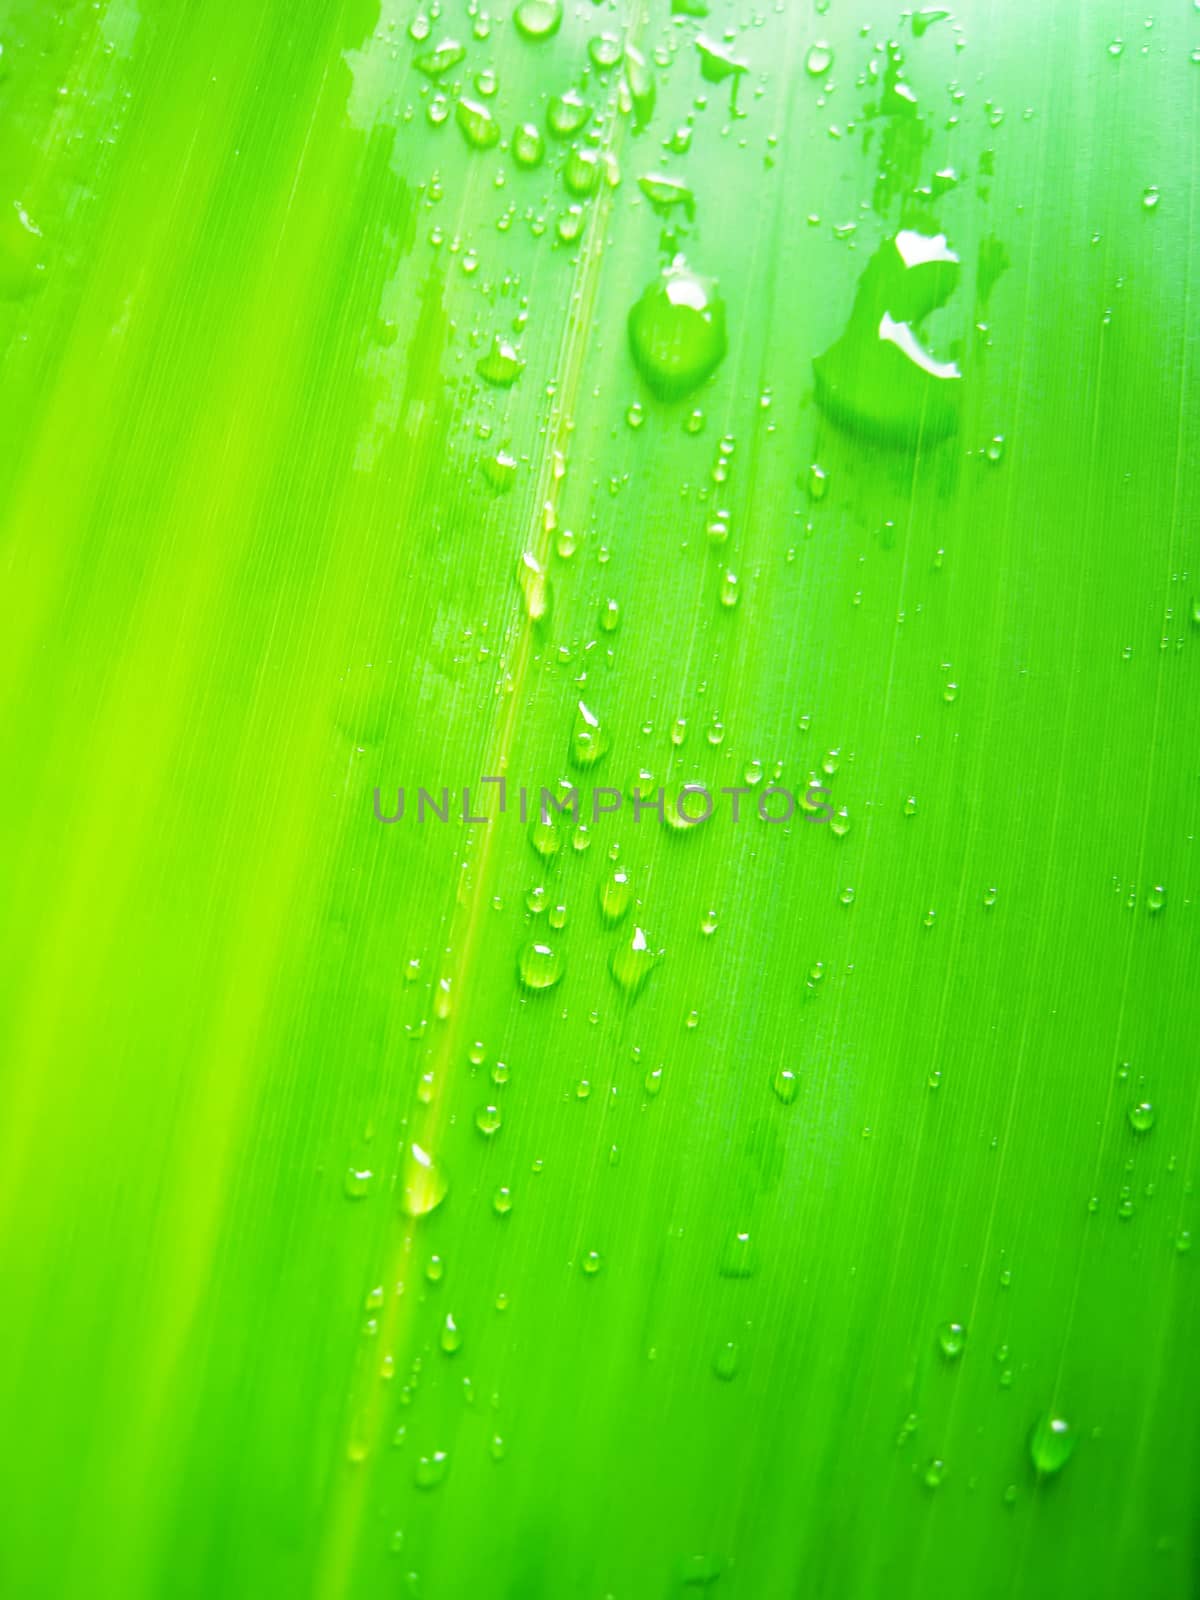 dew drops on bamboo leave